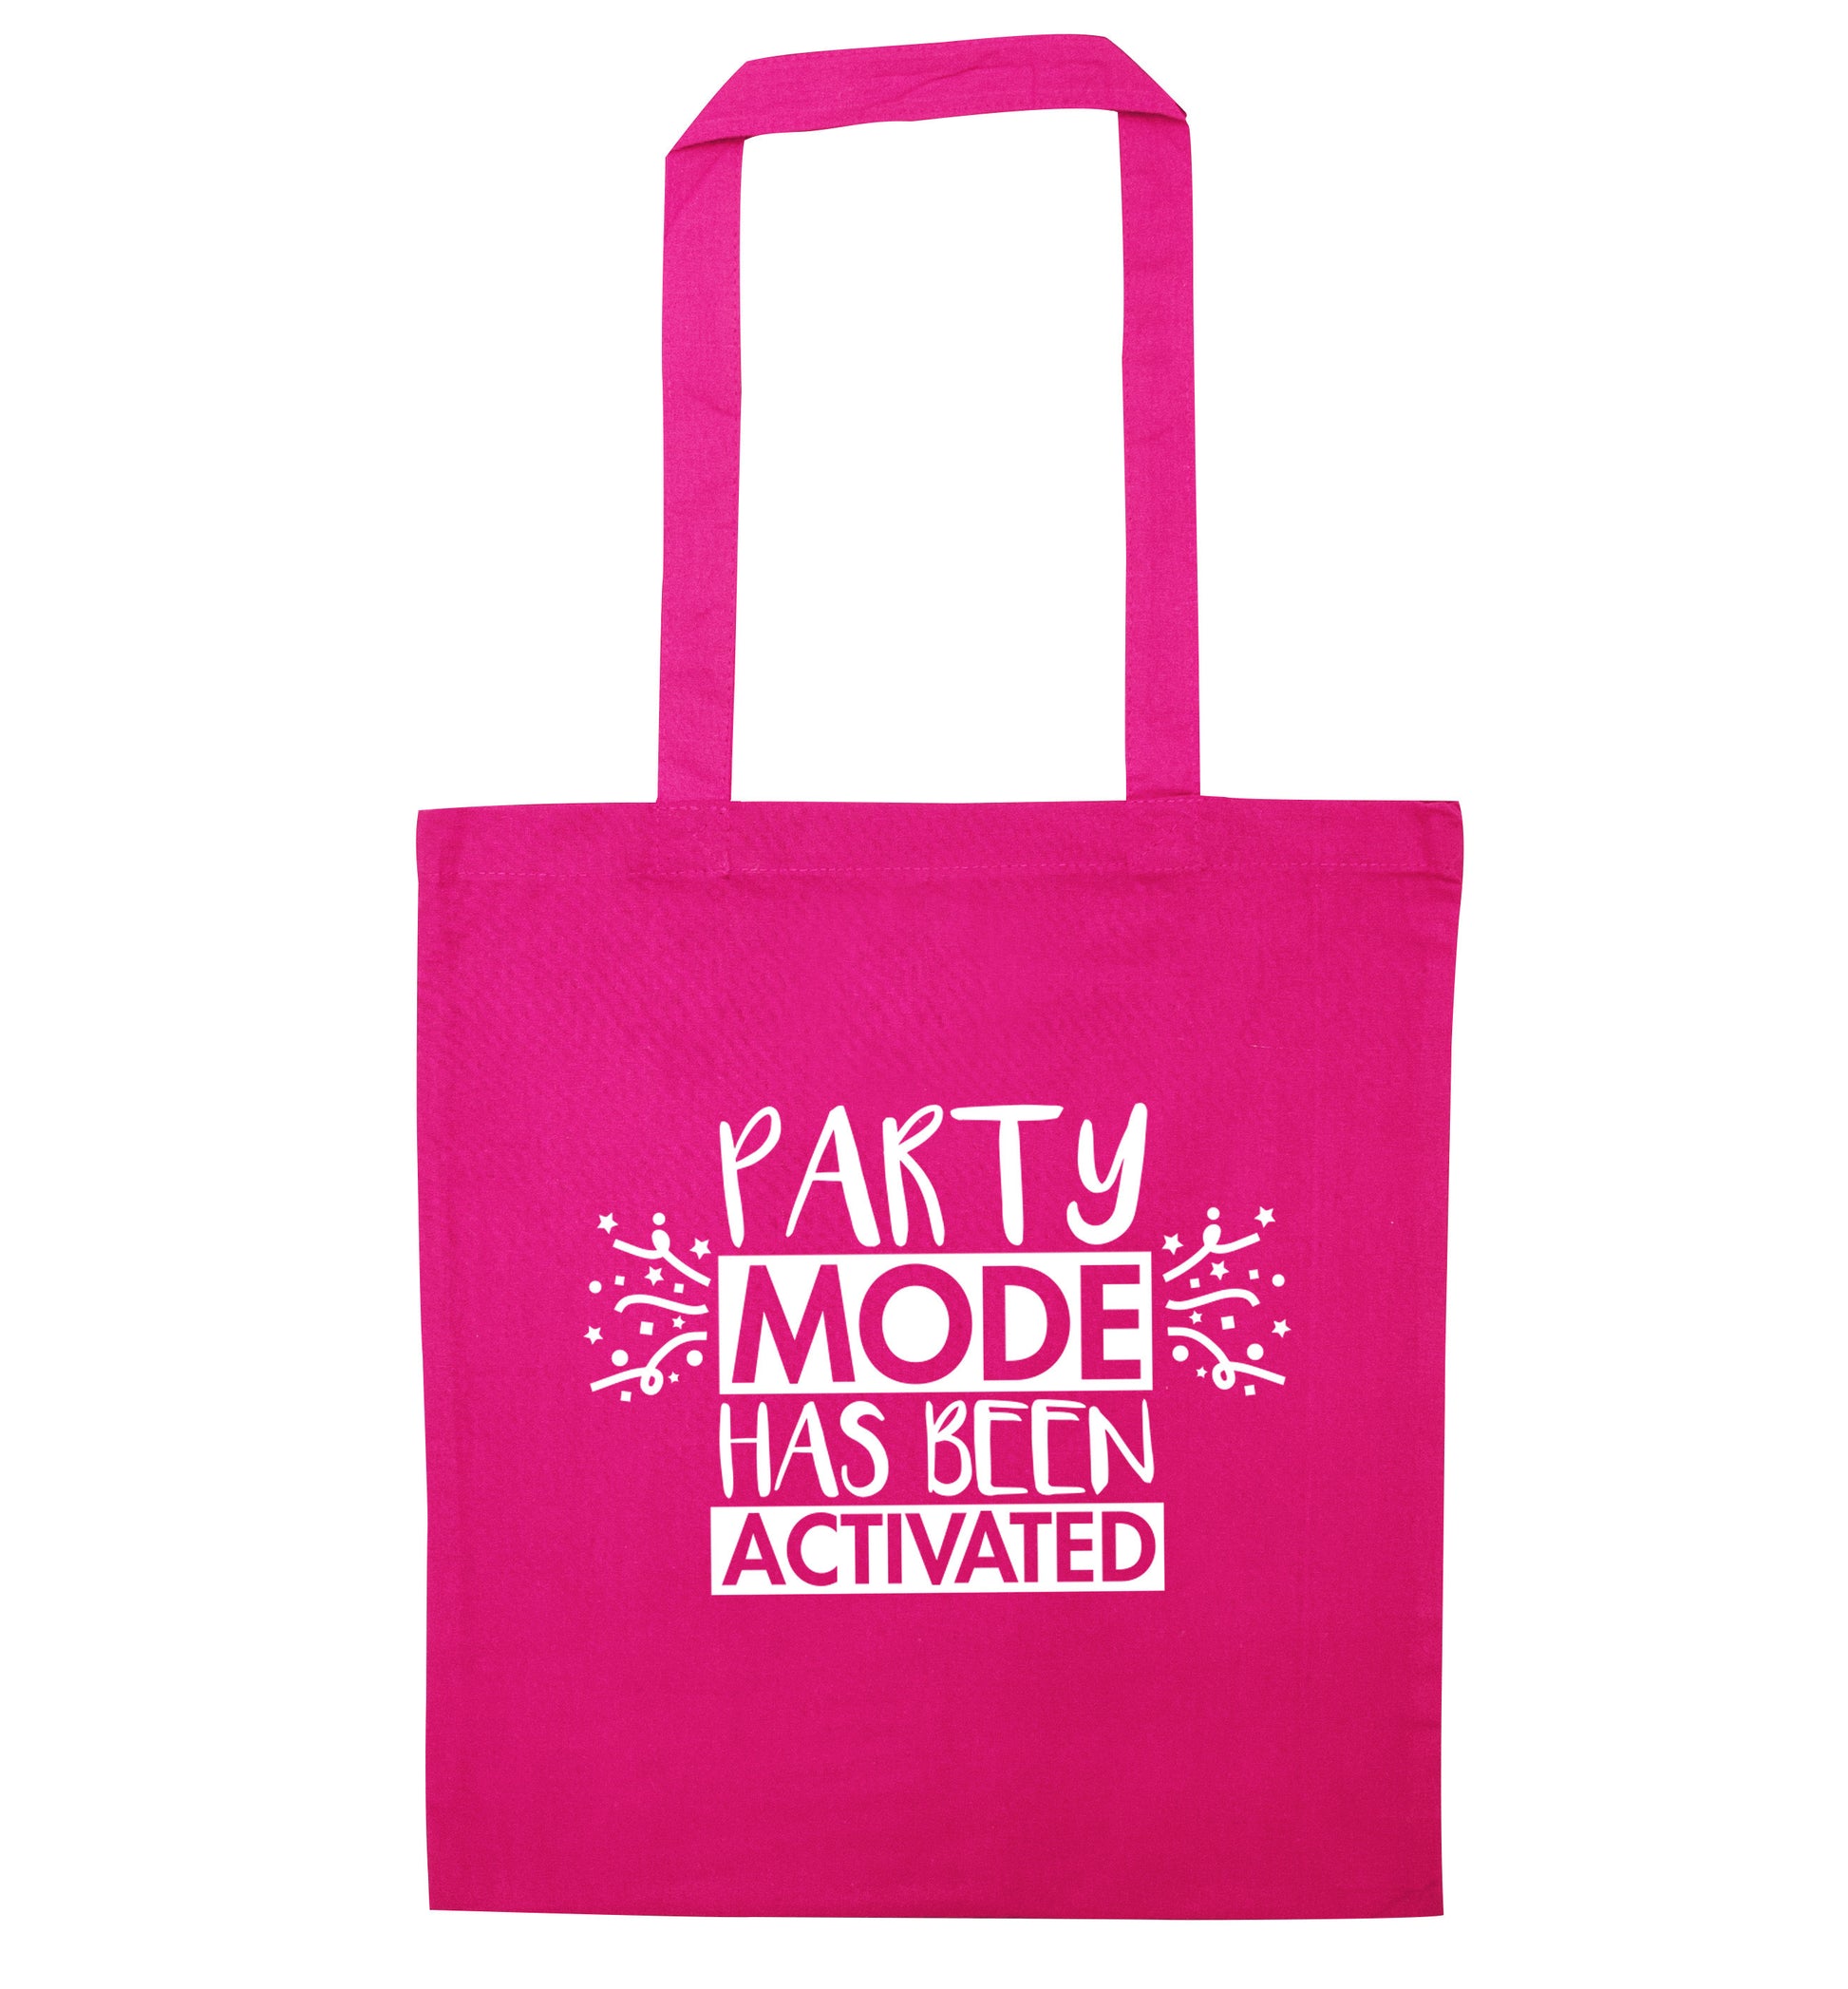 Please do not disturb party mode has been activated pink tote bag